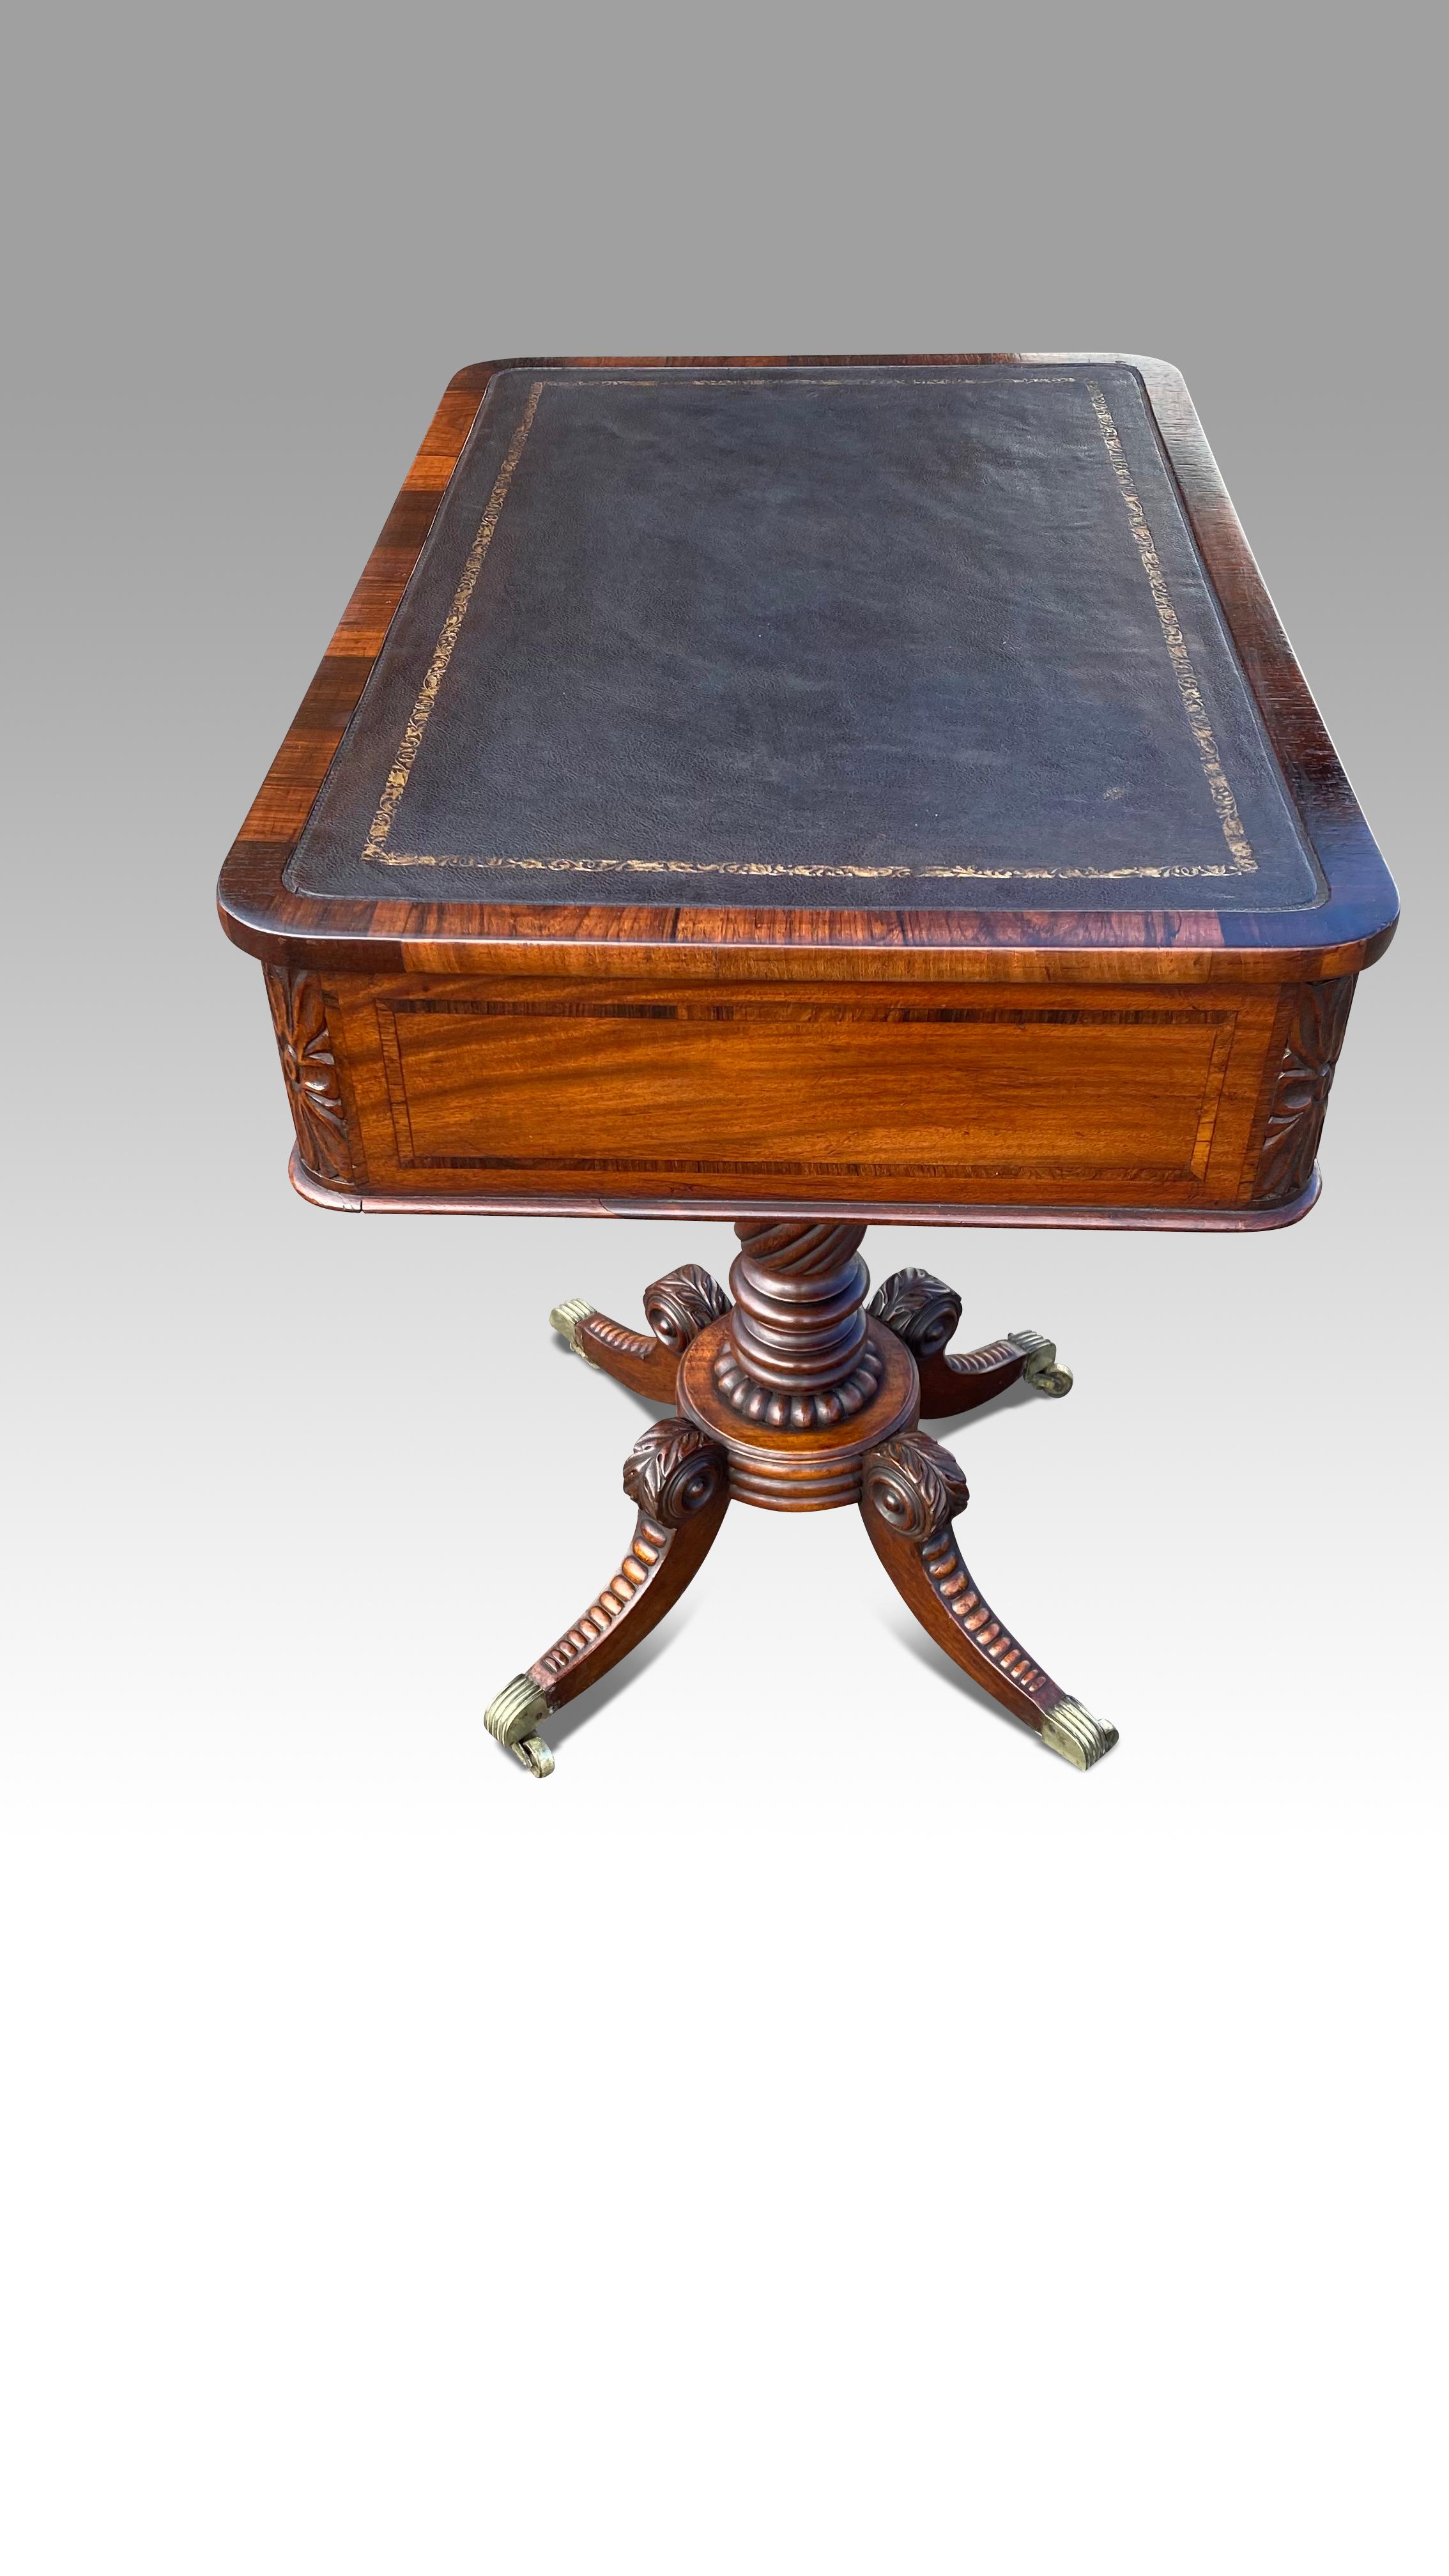 This wonderful writing table with a single drawer concealing a sliding leather lined writing surface within a satinwood border.
The leather lined top sits within a rosewood crossbanded border.
The rounded corners with carved floral